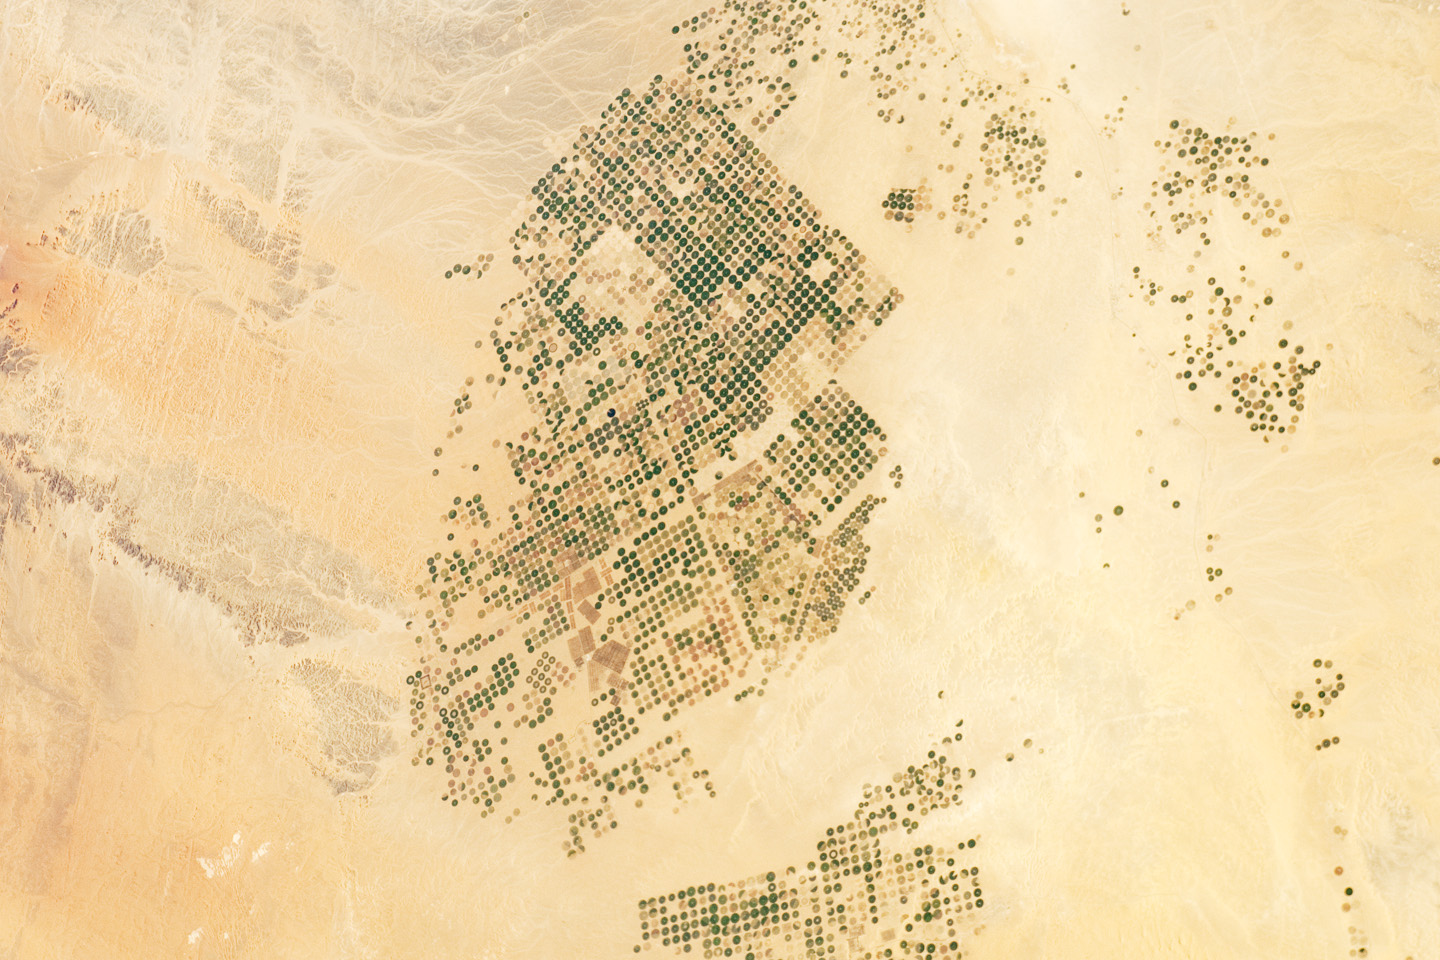 Agricultural Fields, Wadi As-Sirhan Basin, Saudi Arabia - related image preview